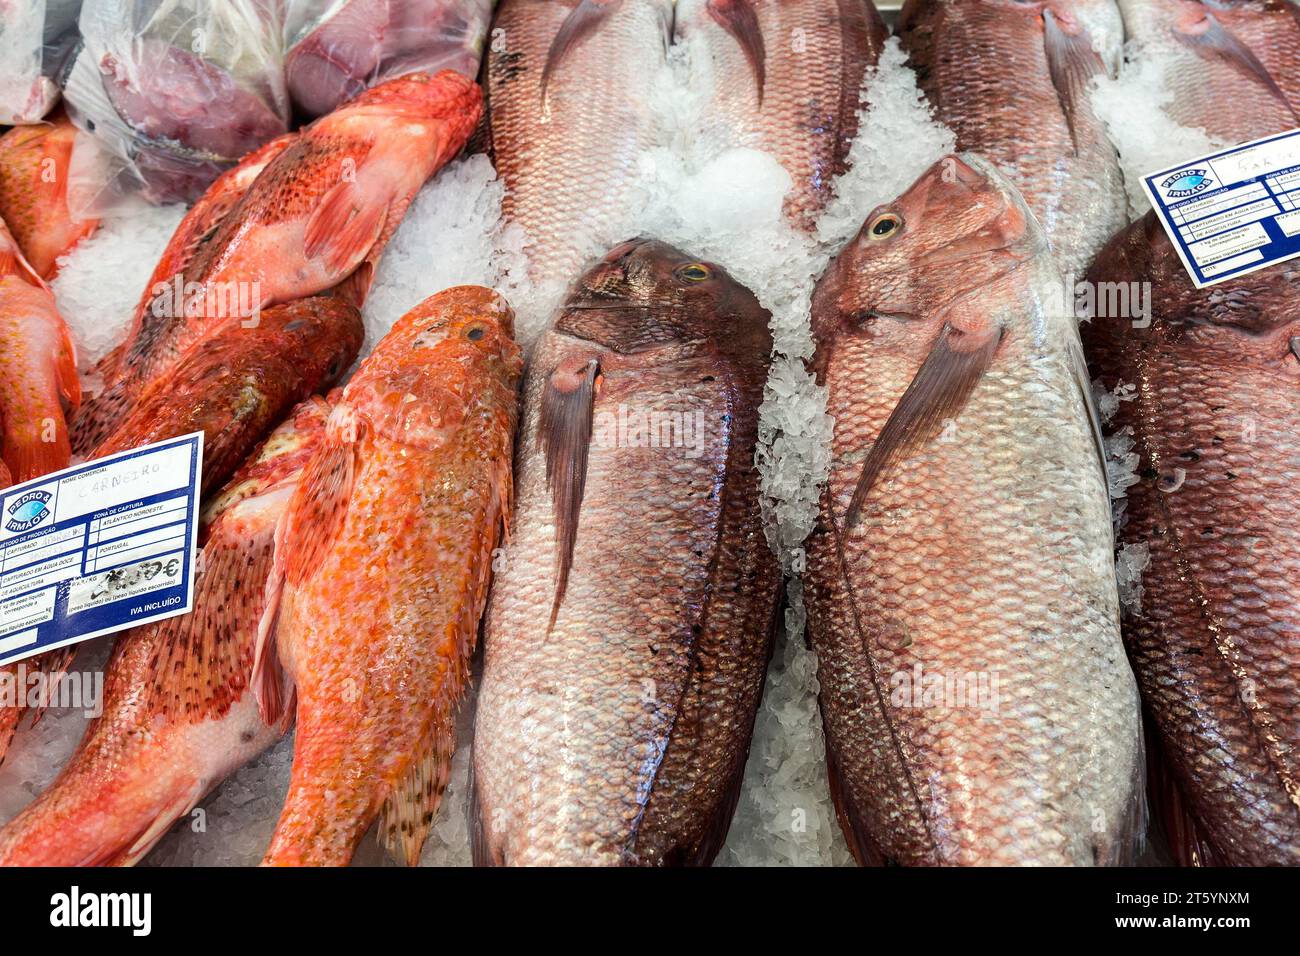 Red sea bream, also known as rose sea bream (Pagellus erythrinus), fish market, Mercado dos Lavradores market hall, Funchal, Madeira Island, Portugal Stock Photo